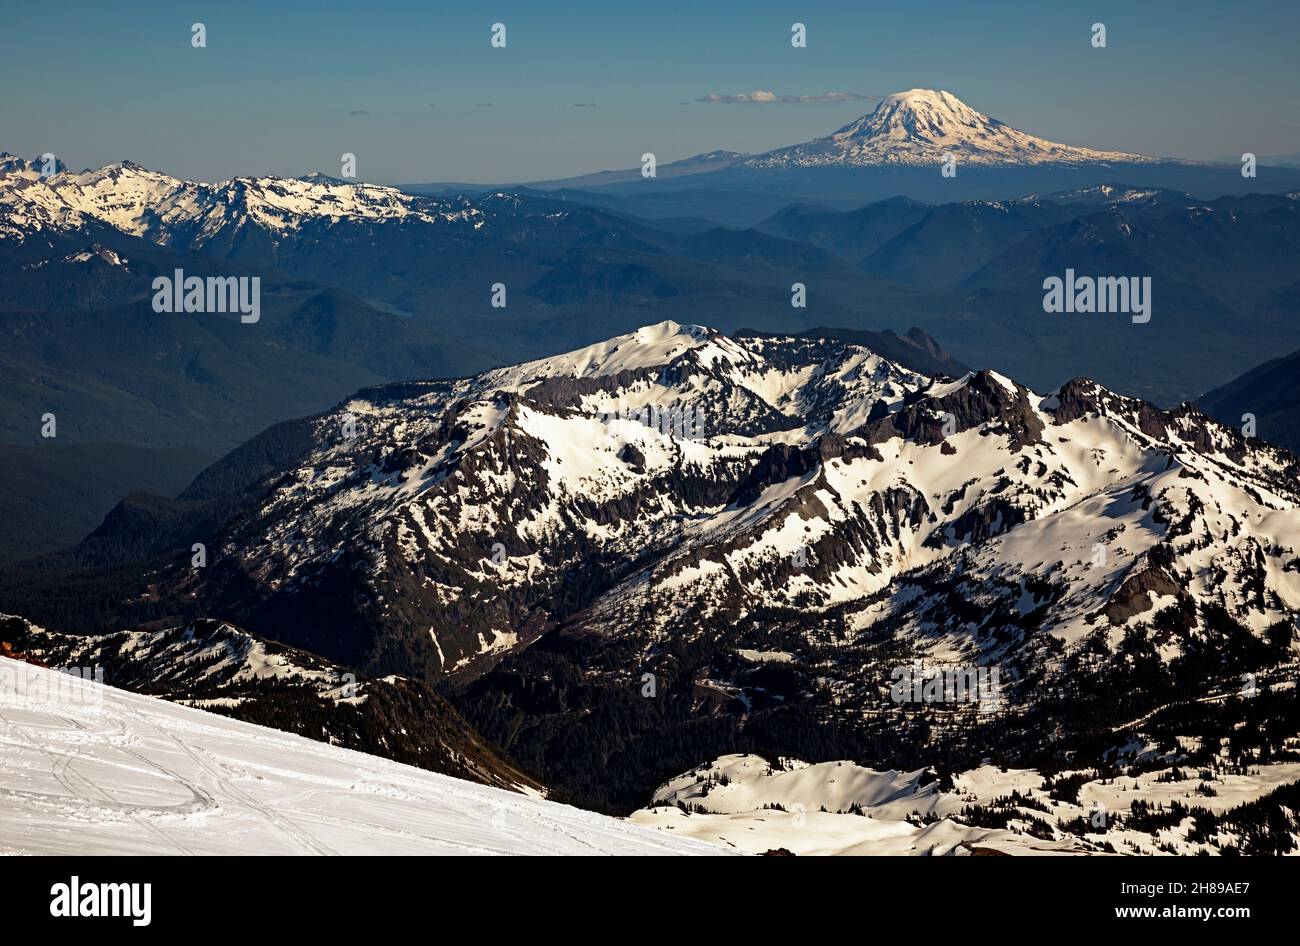 WA19827-00...WASHINGTON - Late afternoon view from Camp Muir overlooking the Tatoosh Range, the Goat Rocks and Mount Adams from Mount Rainier N P. Stock Photo